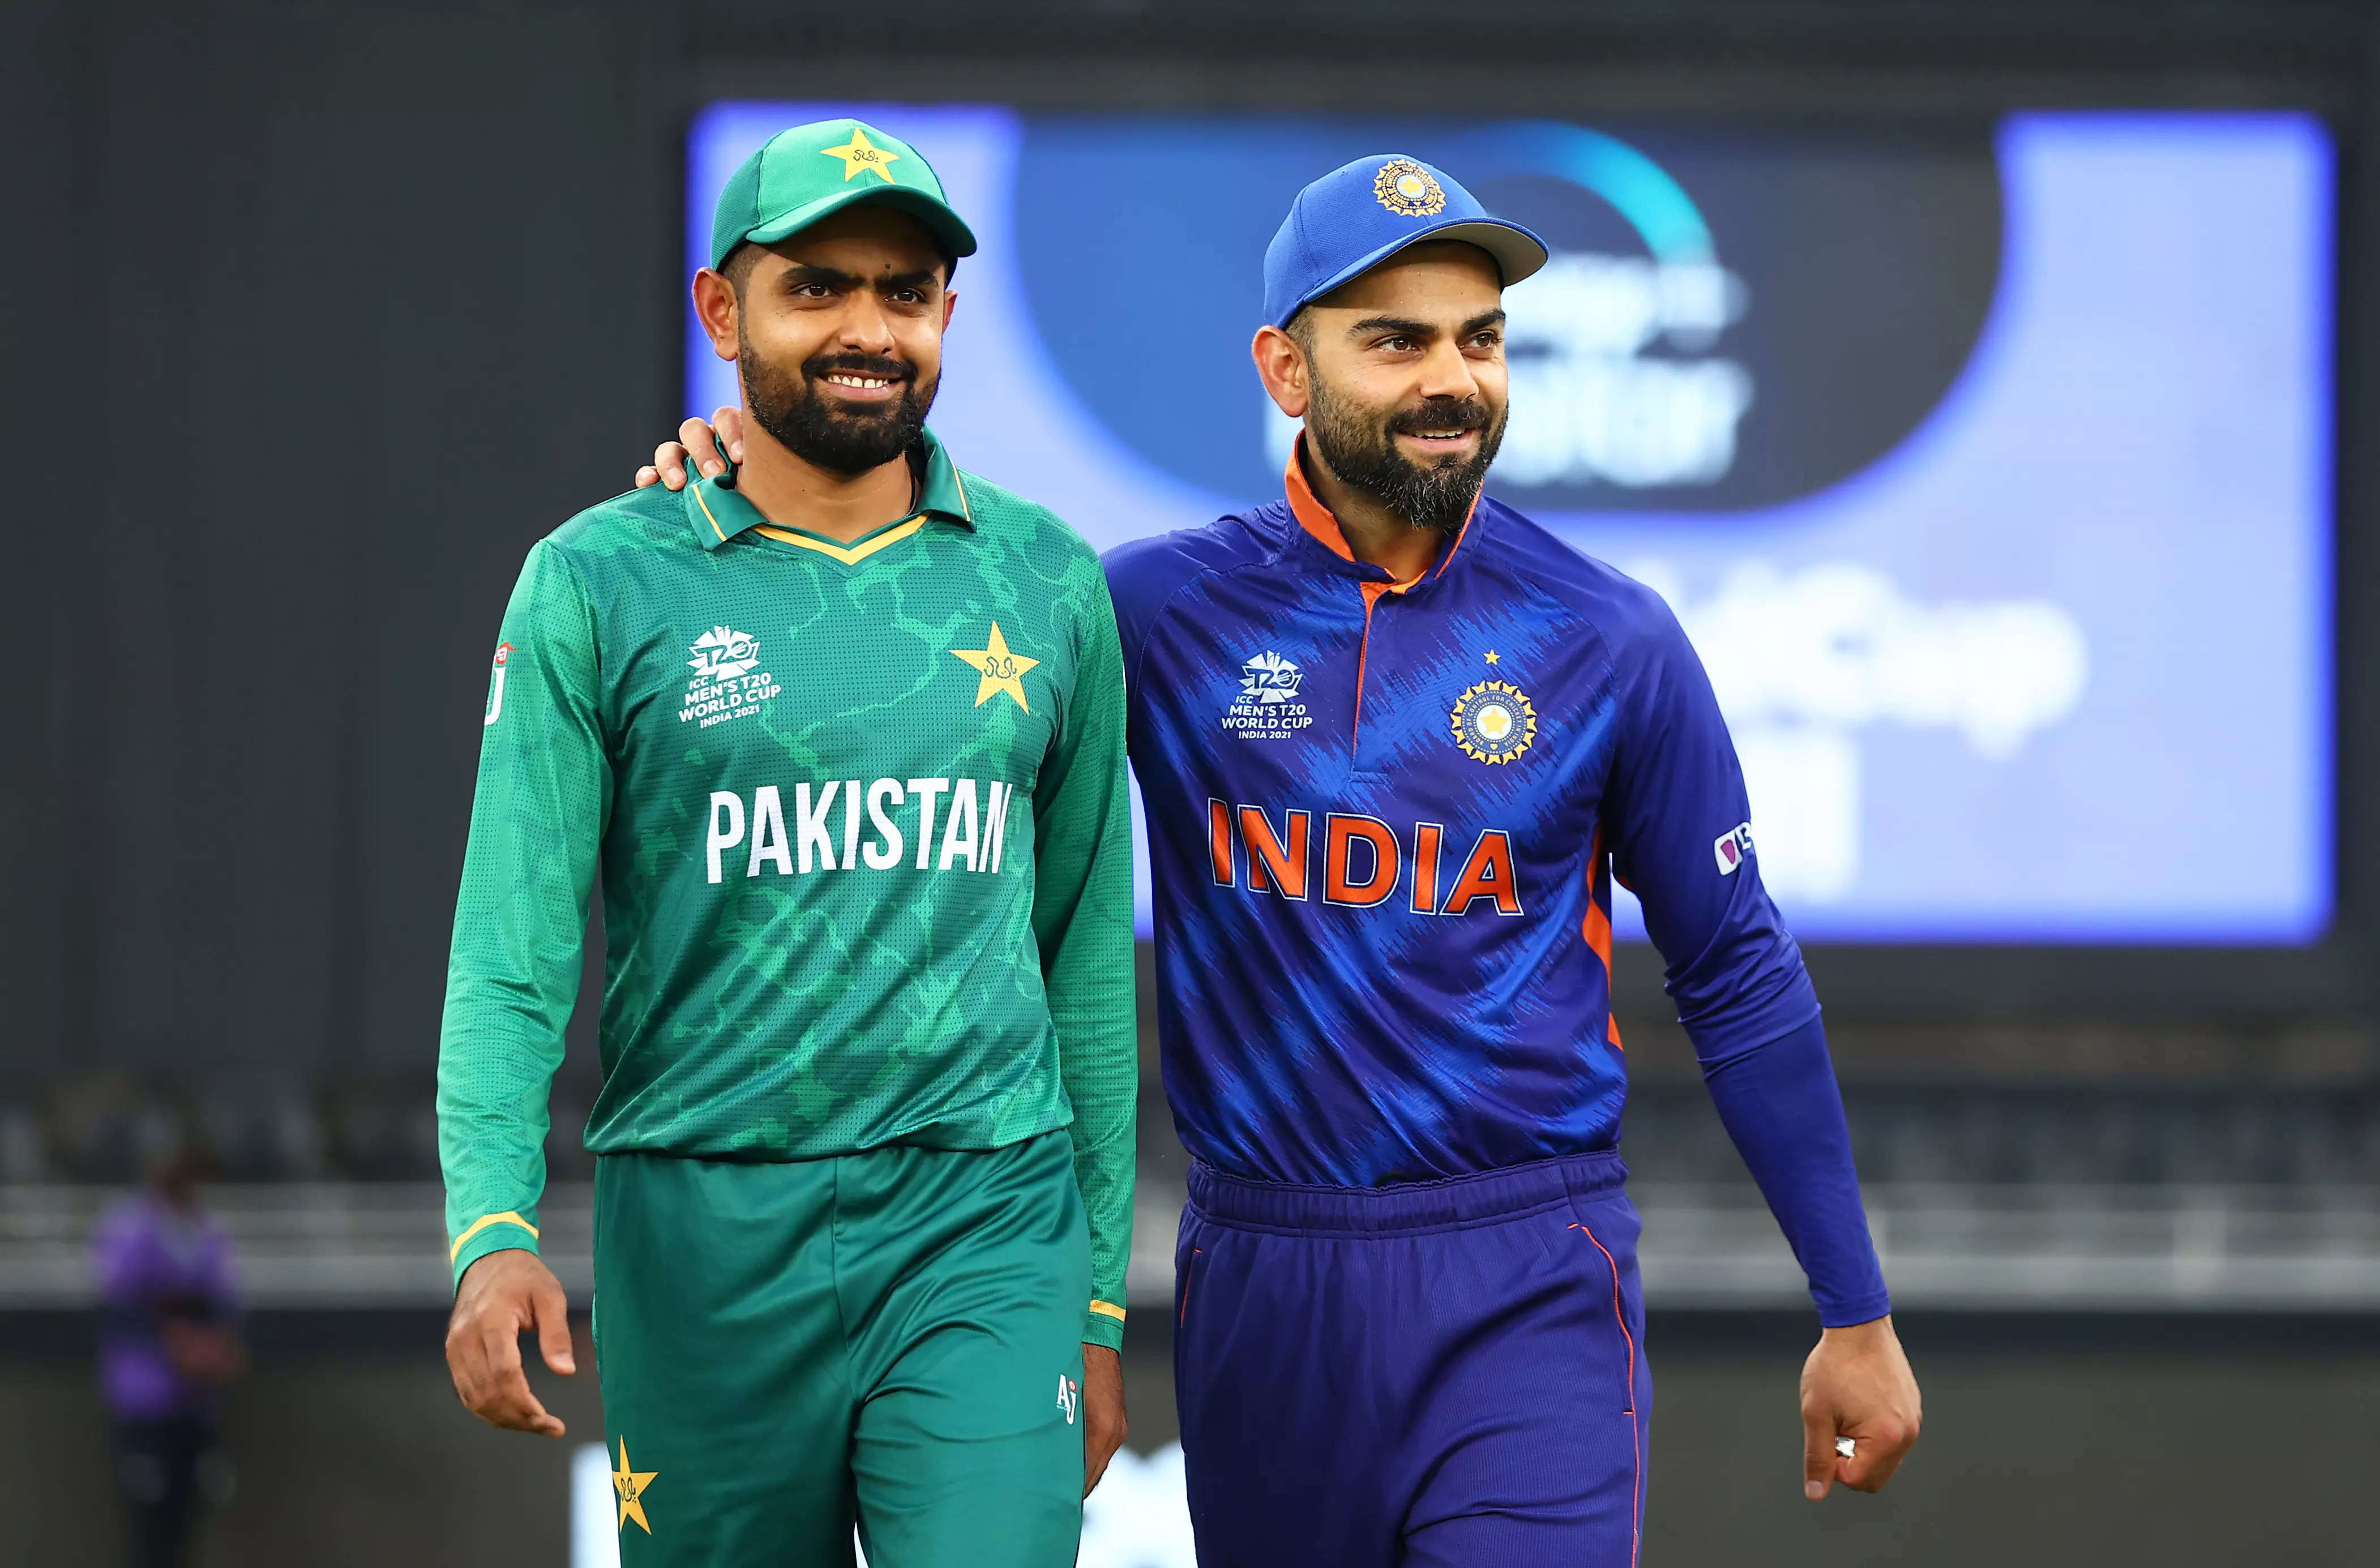 ICC T20 World Cup 2022 India vs Pakistan match to be held on October 23 at MCG Business Insider India